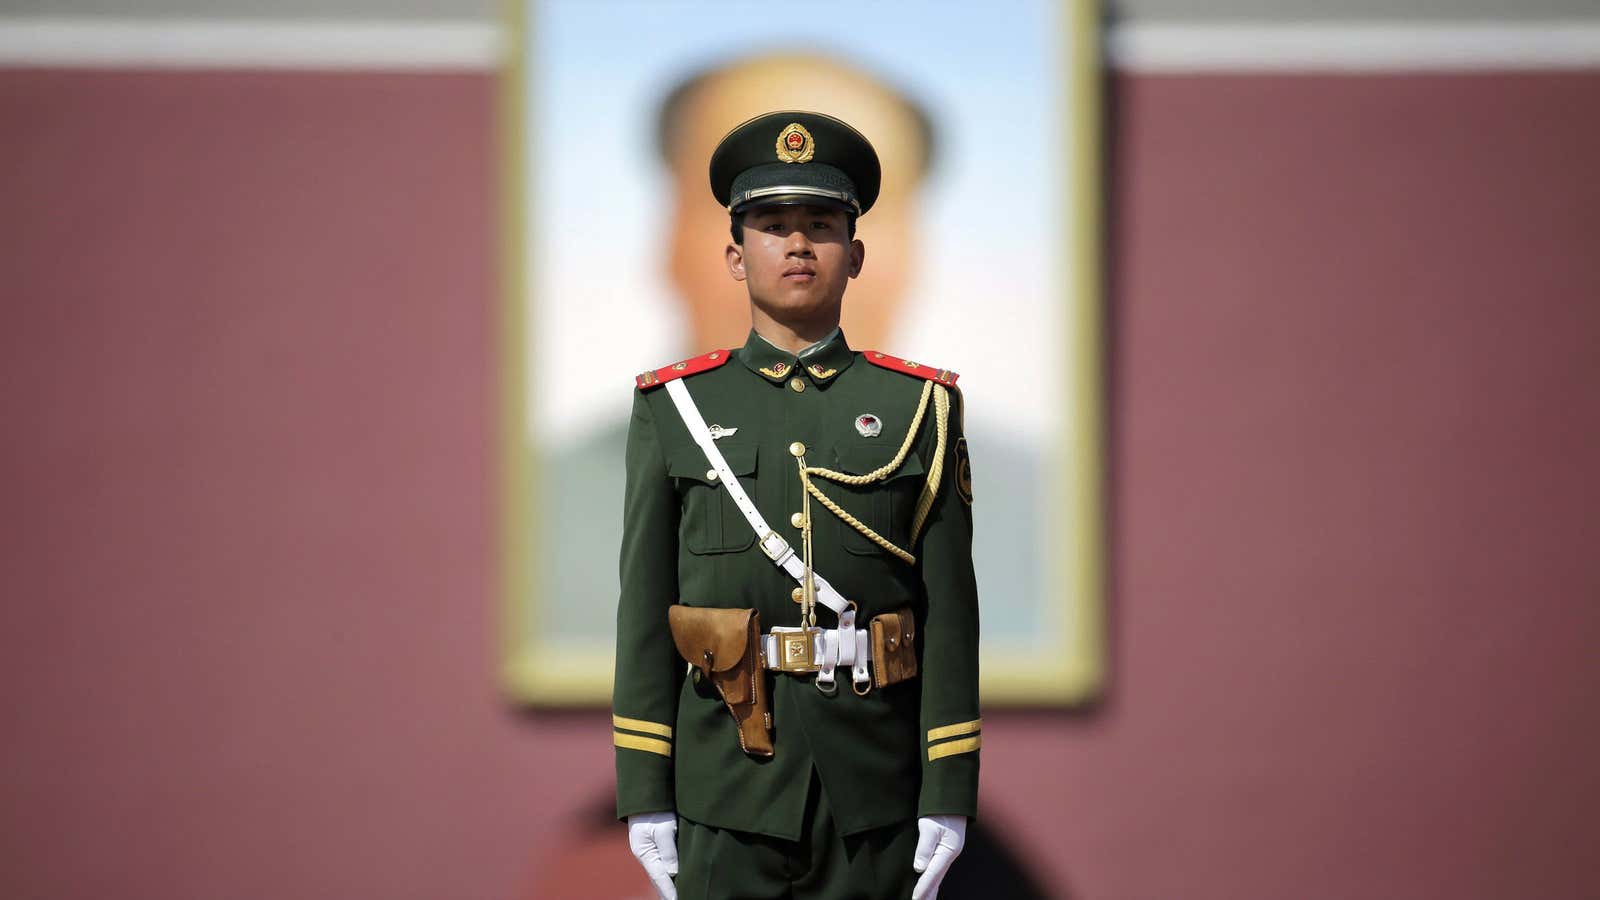 A paramilitary police officer stands guard in front of a portrait of China’s former chairman Mao Zedong.